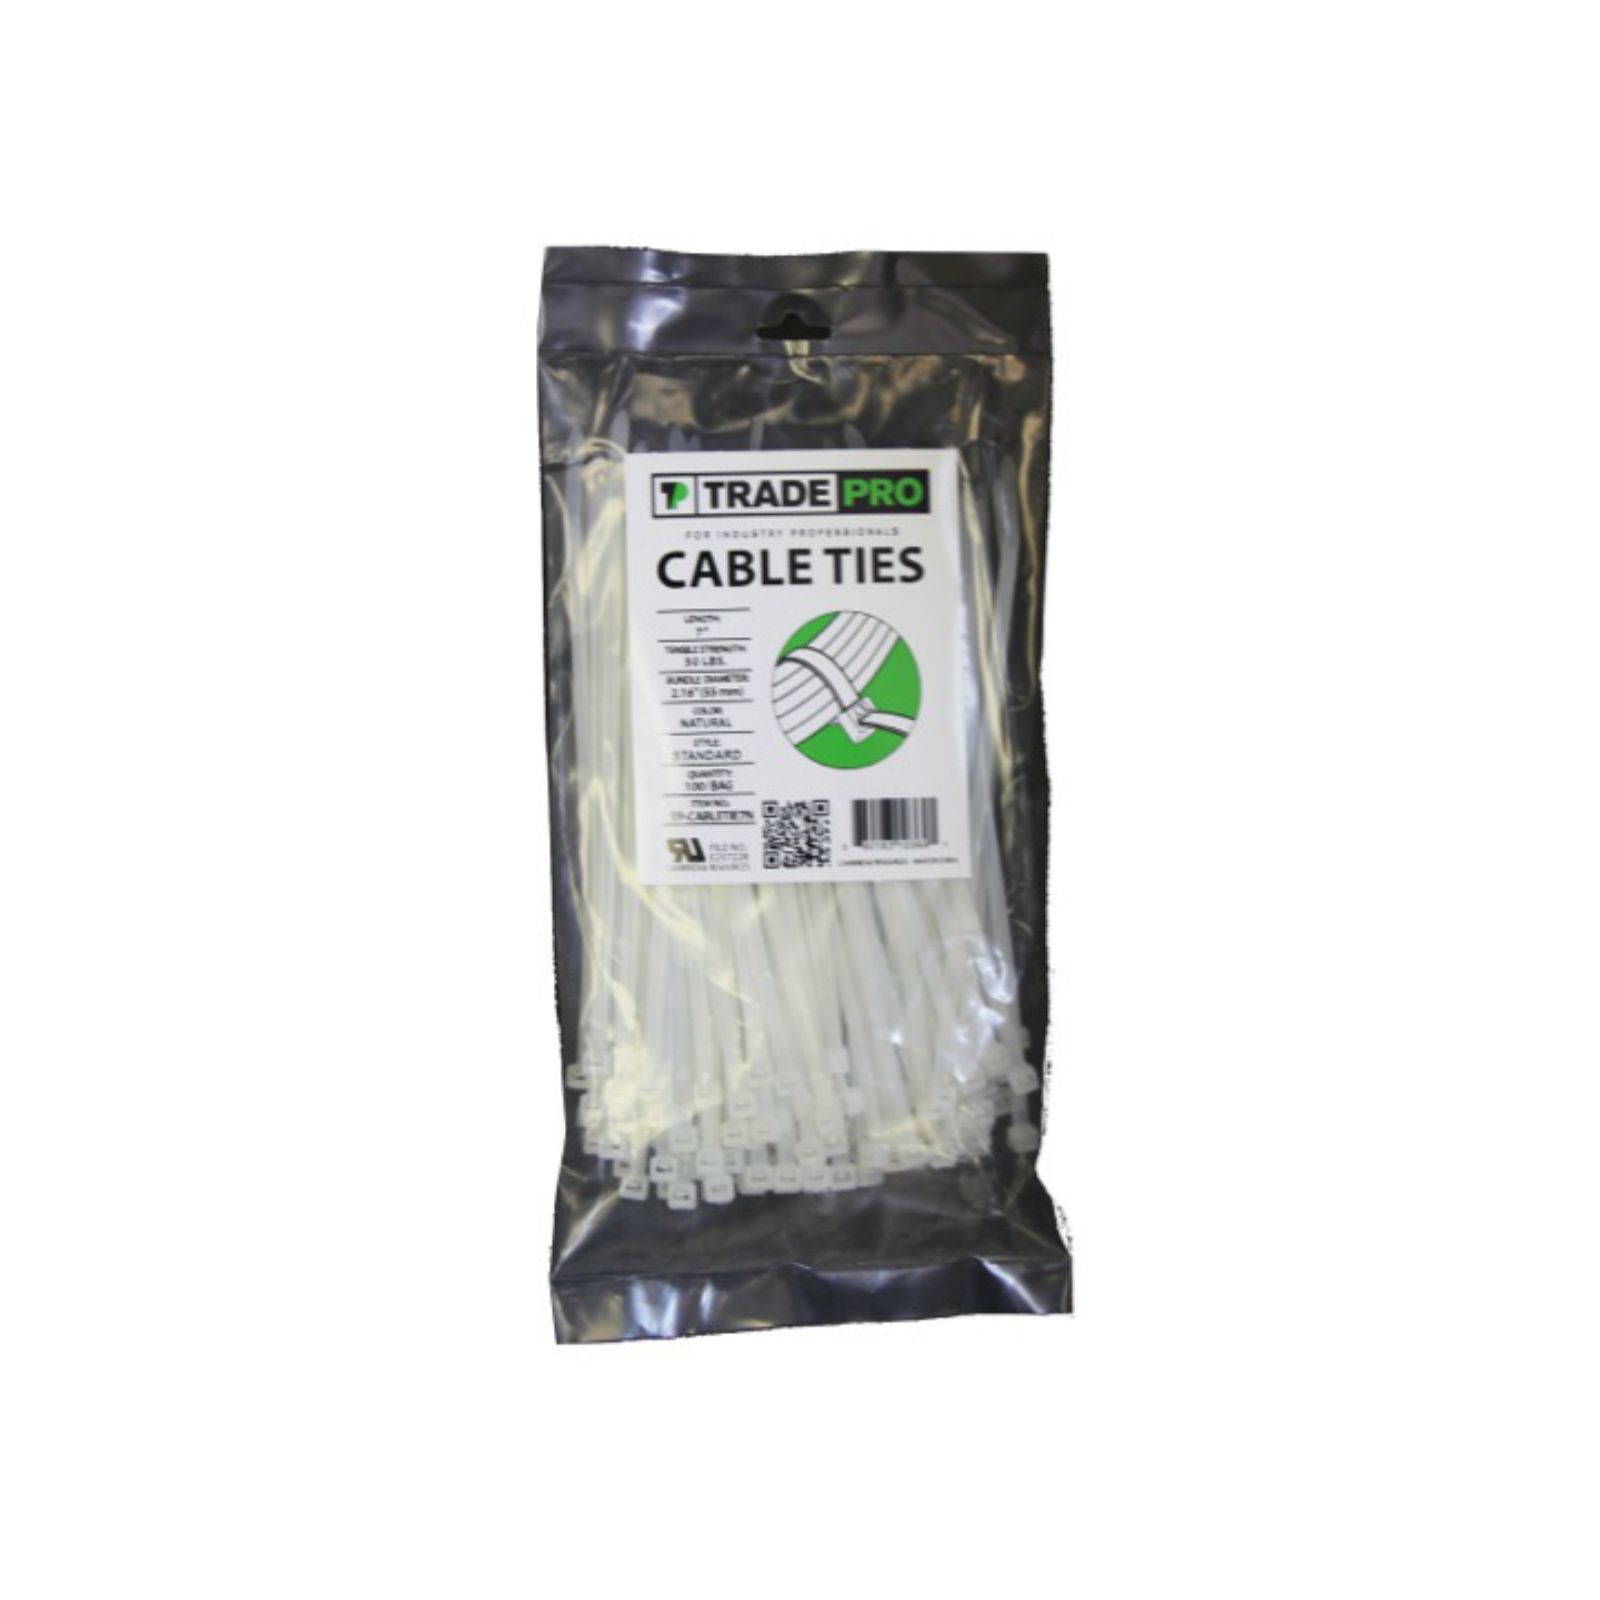 TradePro TP-CABLETIE7N - 7" Cable Ties, 50 lb. Tensile Strength, Natural, Package of 100